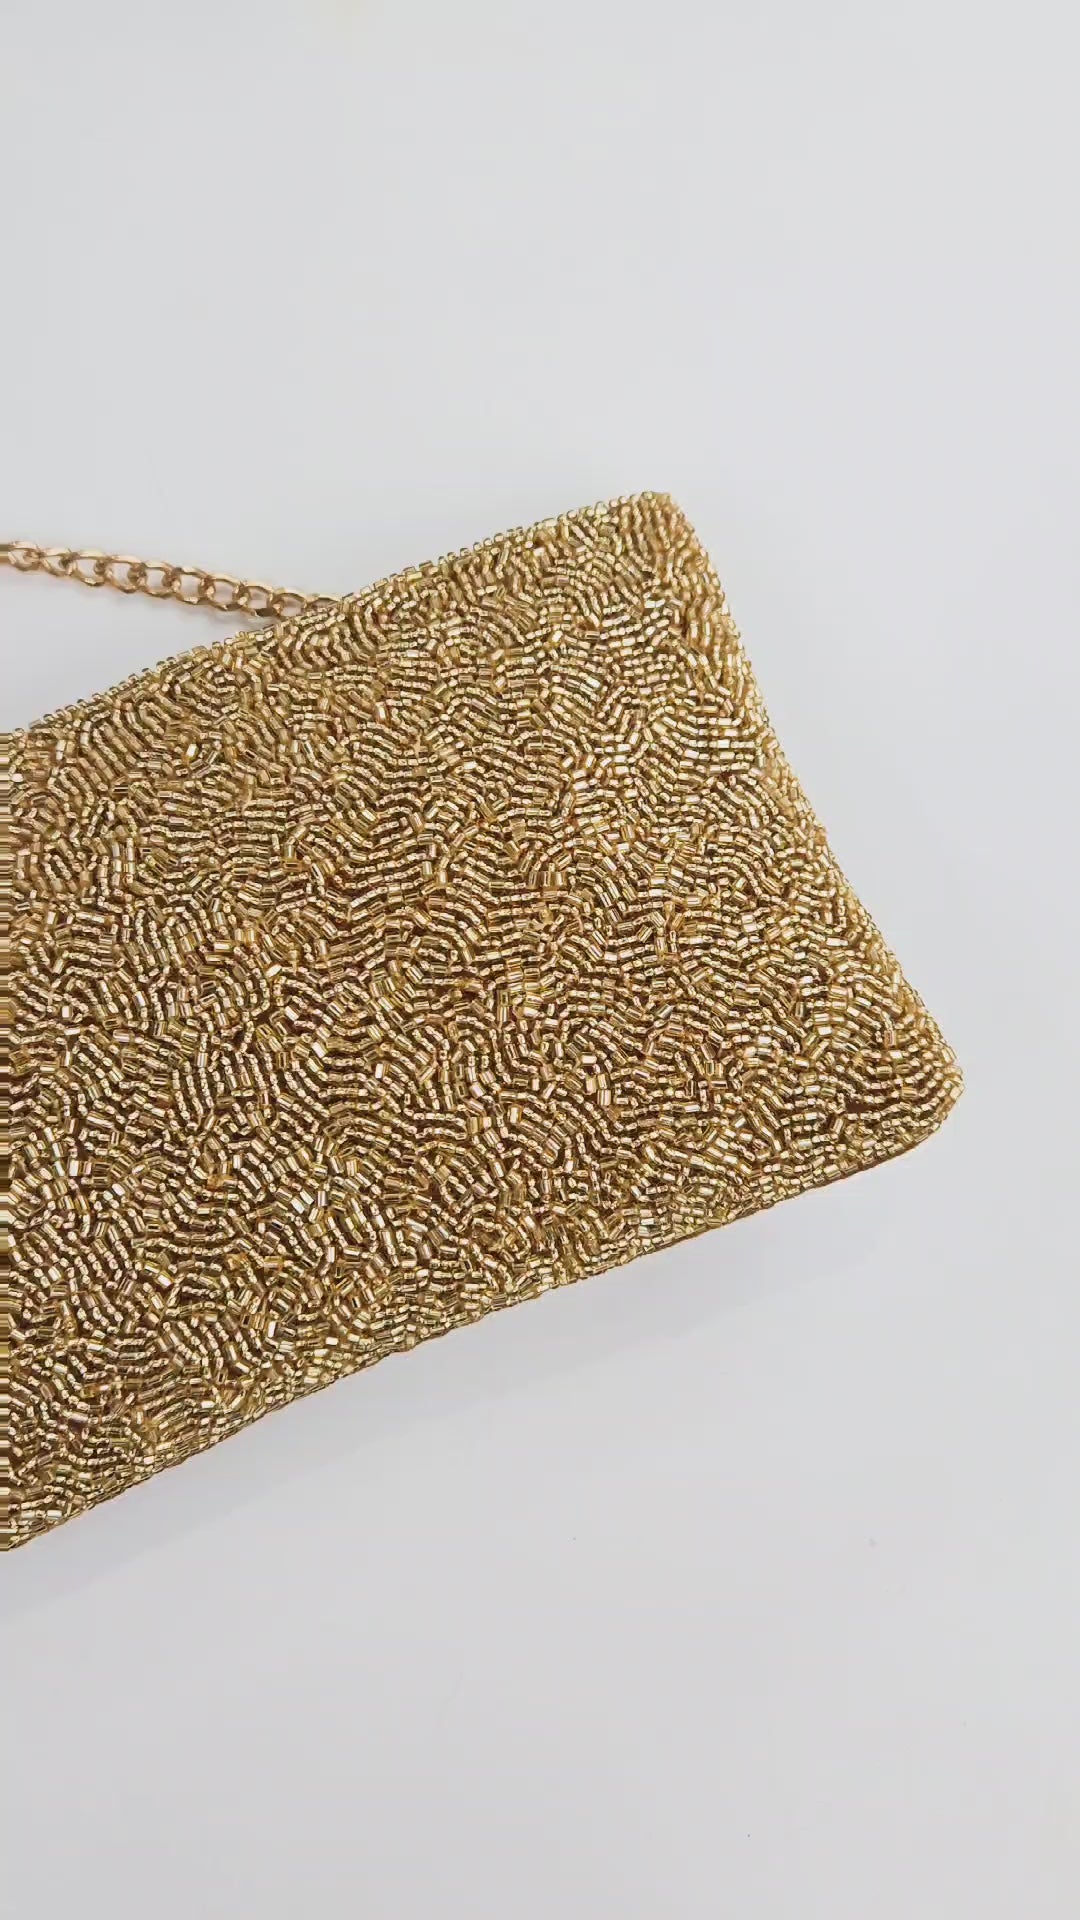 Sophisticated Evening Bag for Wedding: A formal handbag designed for weddings and black-tie affairs, this seed bead clutch is a must-have accessory for an elegant look. Shine bright at any event with this sparkling evening bag.